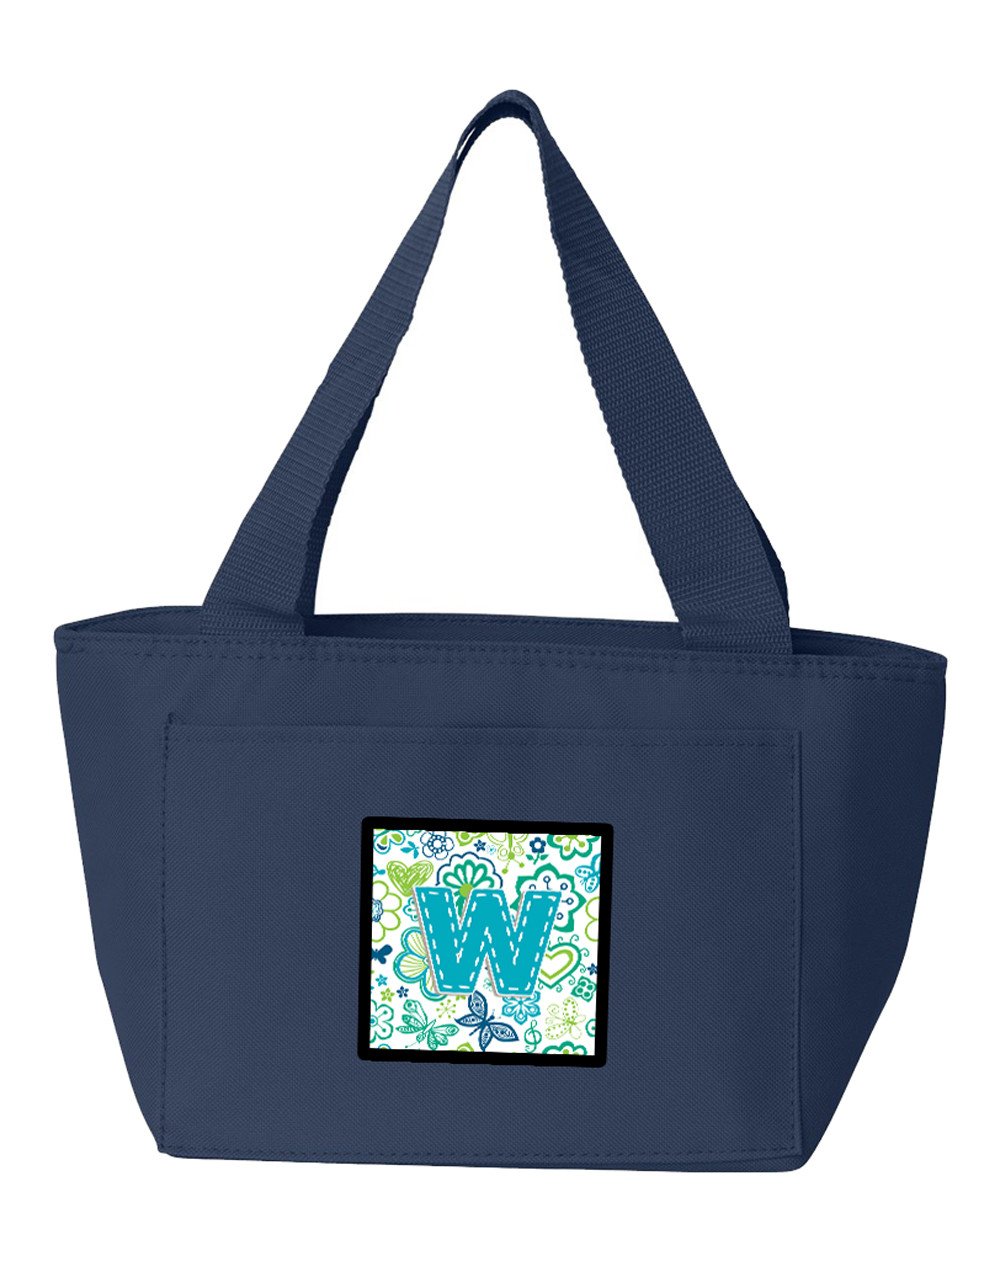 Letter W Flowers and Butterflies Teal Blue Lunch Bag CJ2006-WNA-8808 by Caroline's Treasures